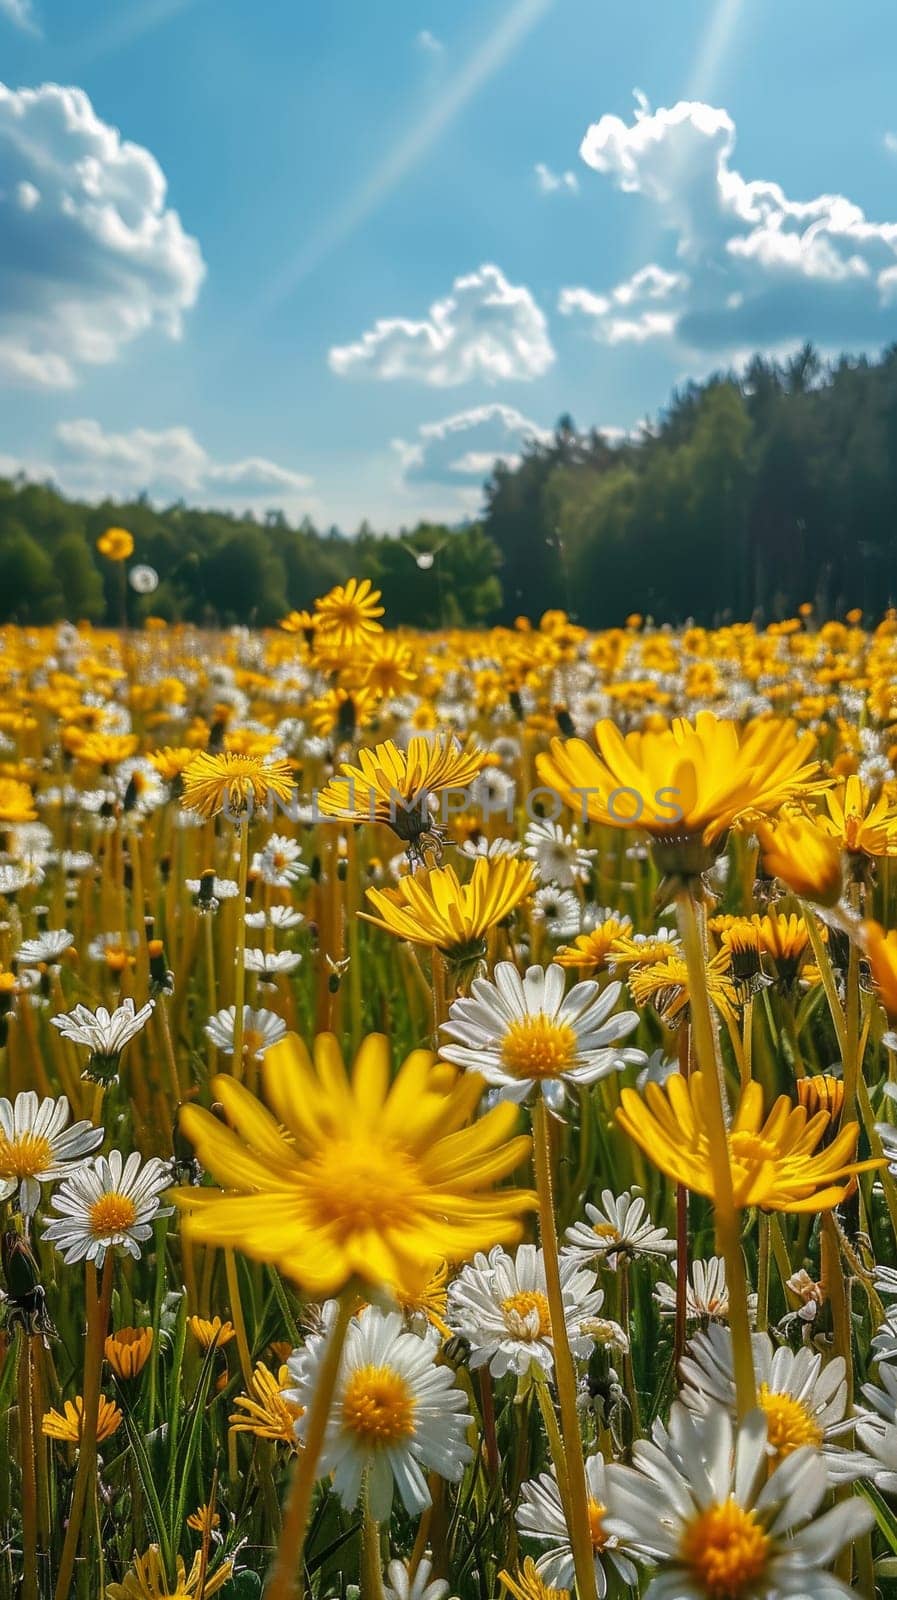 A field of yellow and white flowers with a blue sky in the background by itchaznong